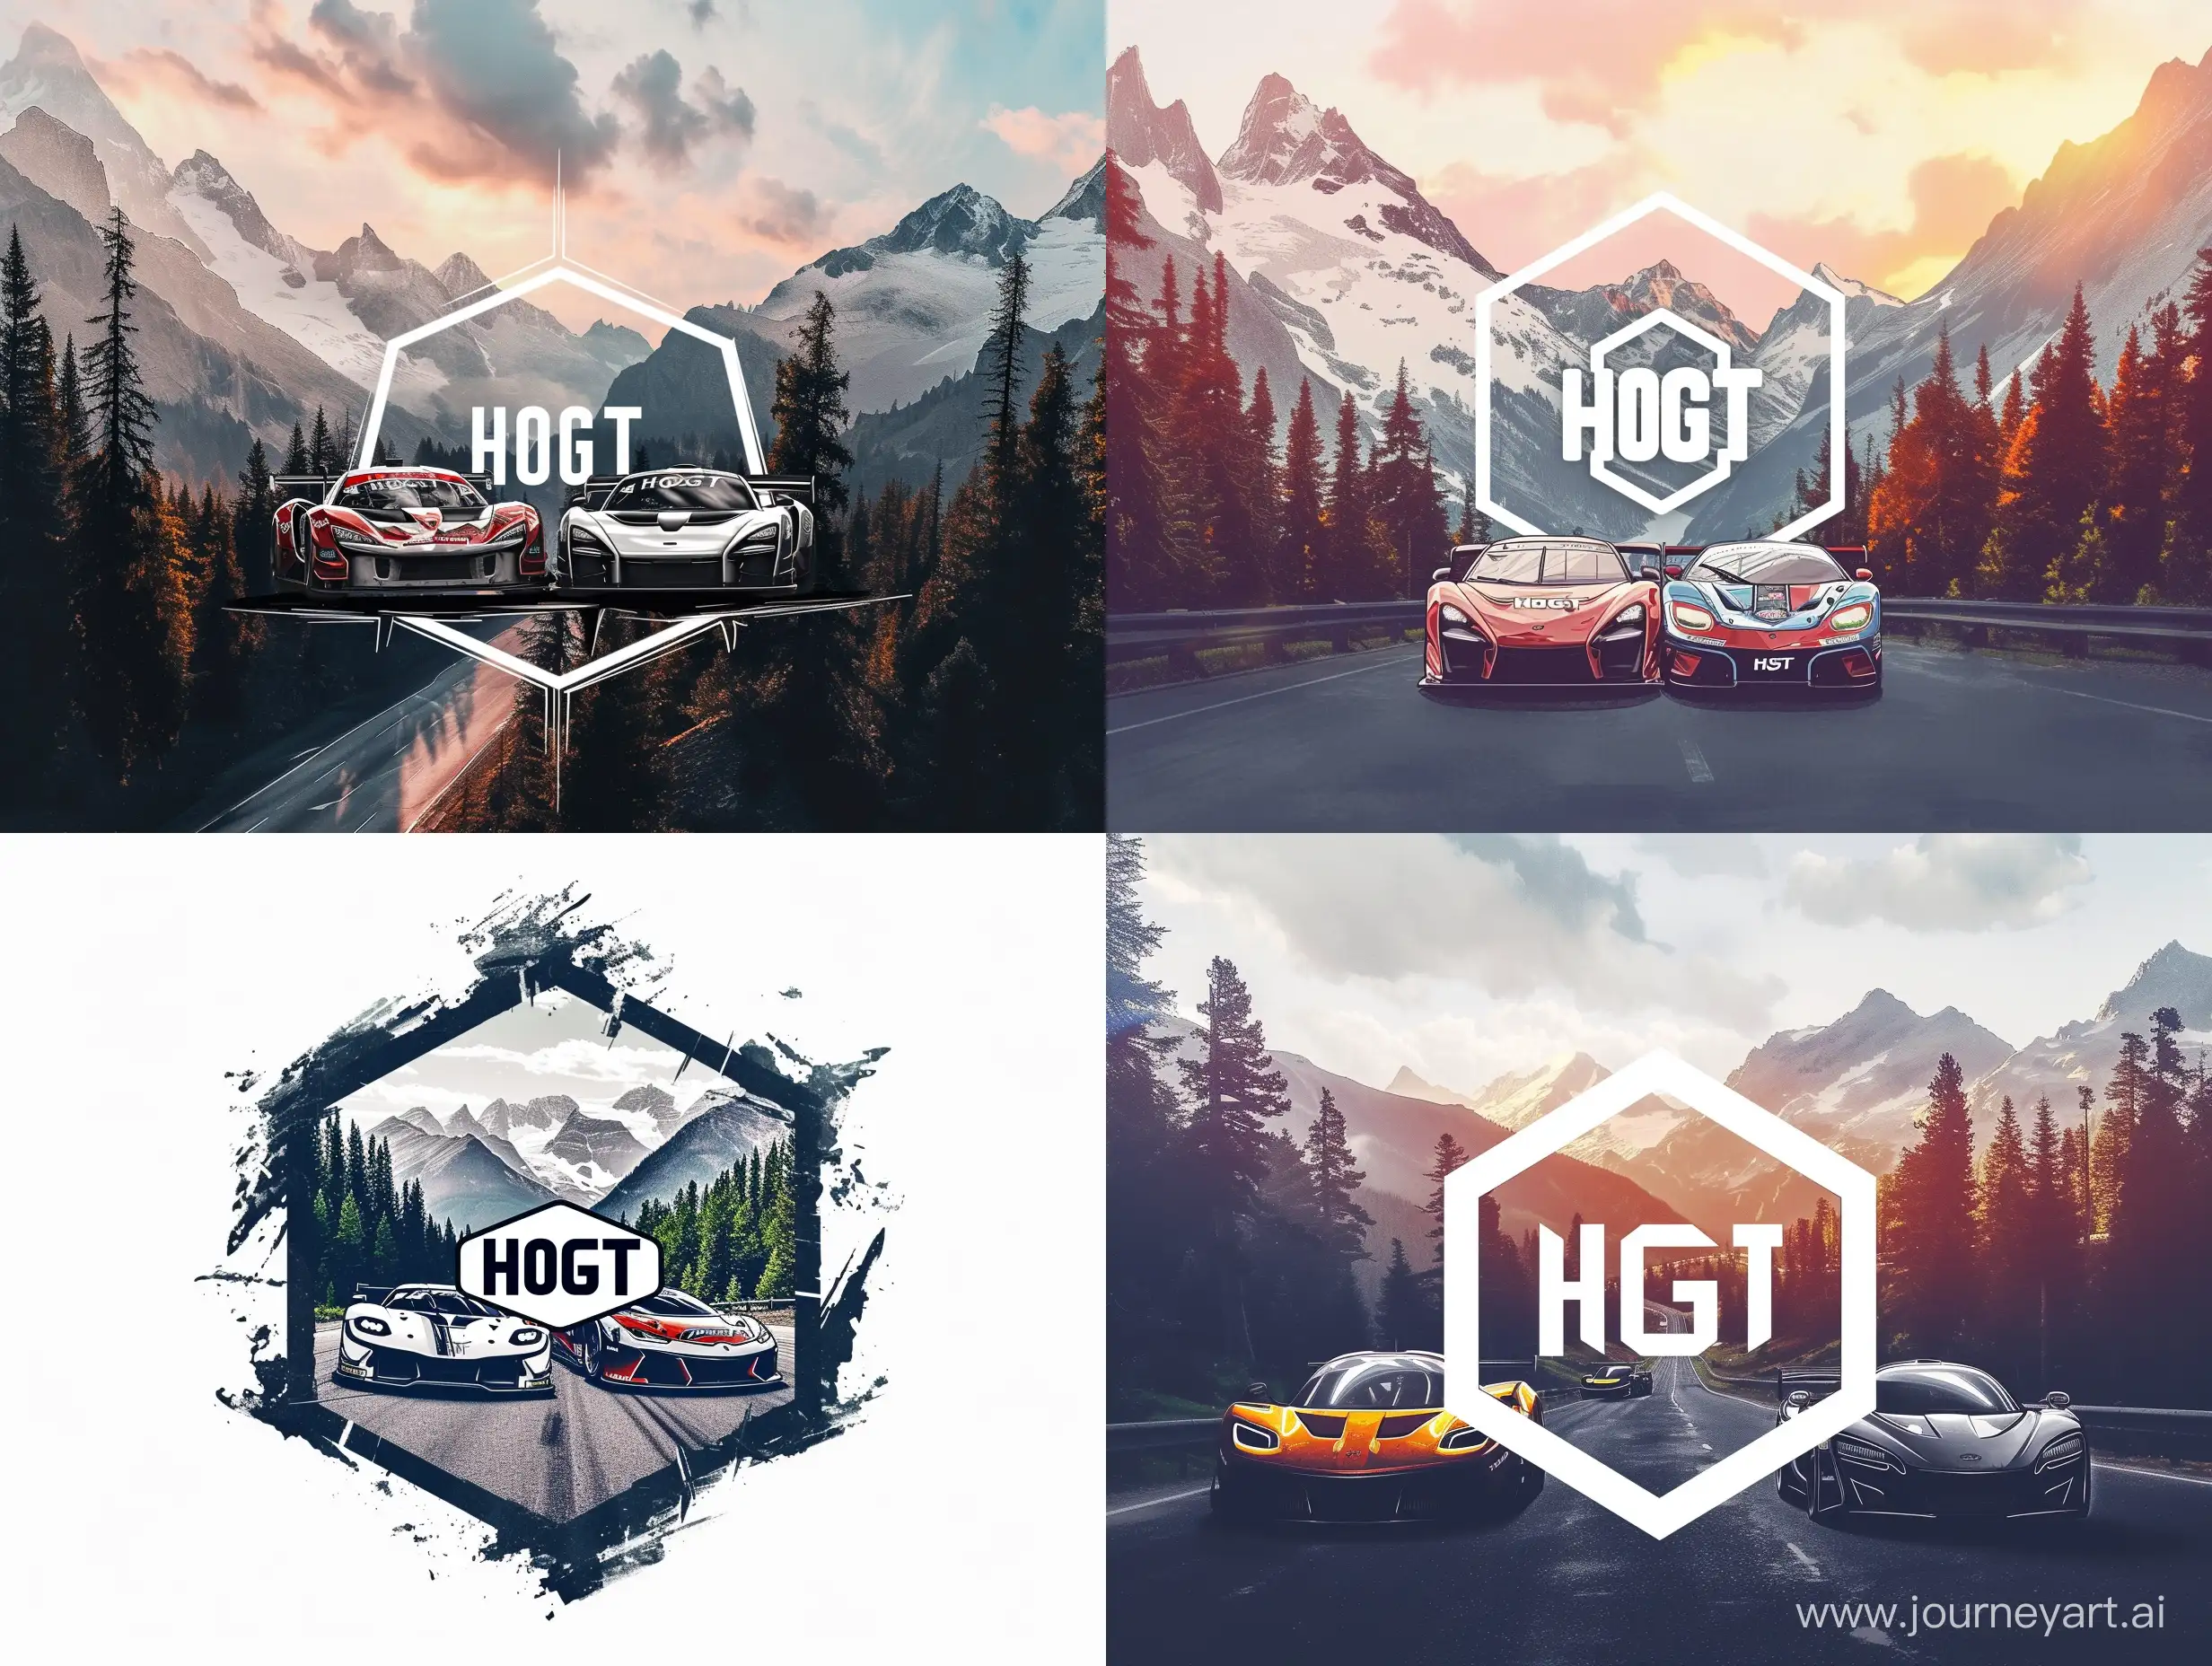 draw style car race logo, octagon shape, couple racing cars,
with HoGT tag in the middle, mountains with trees with road in backround